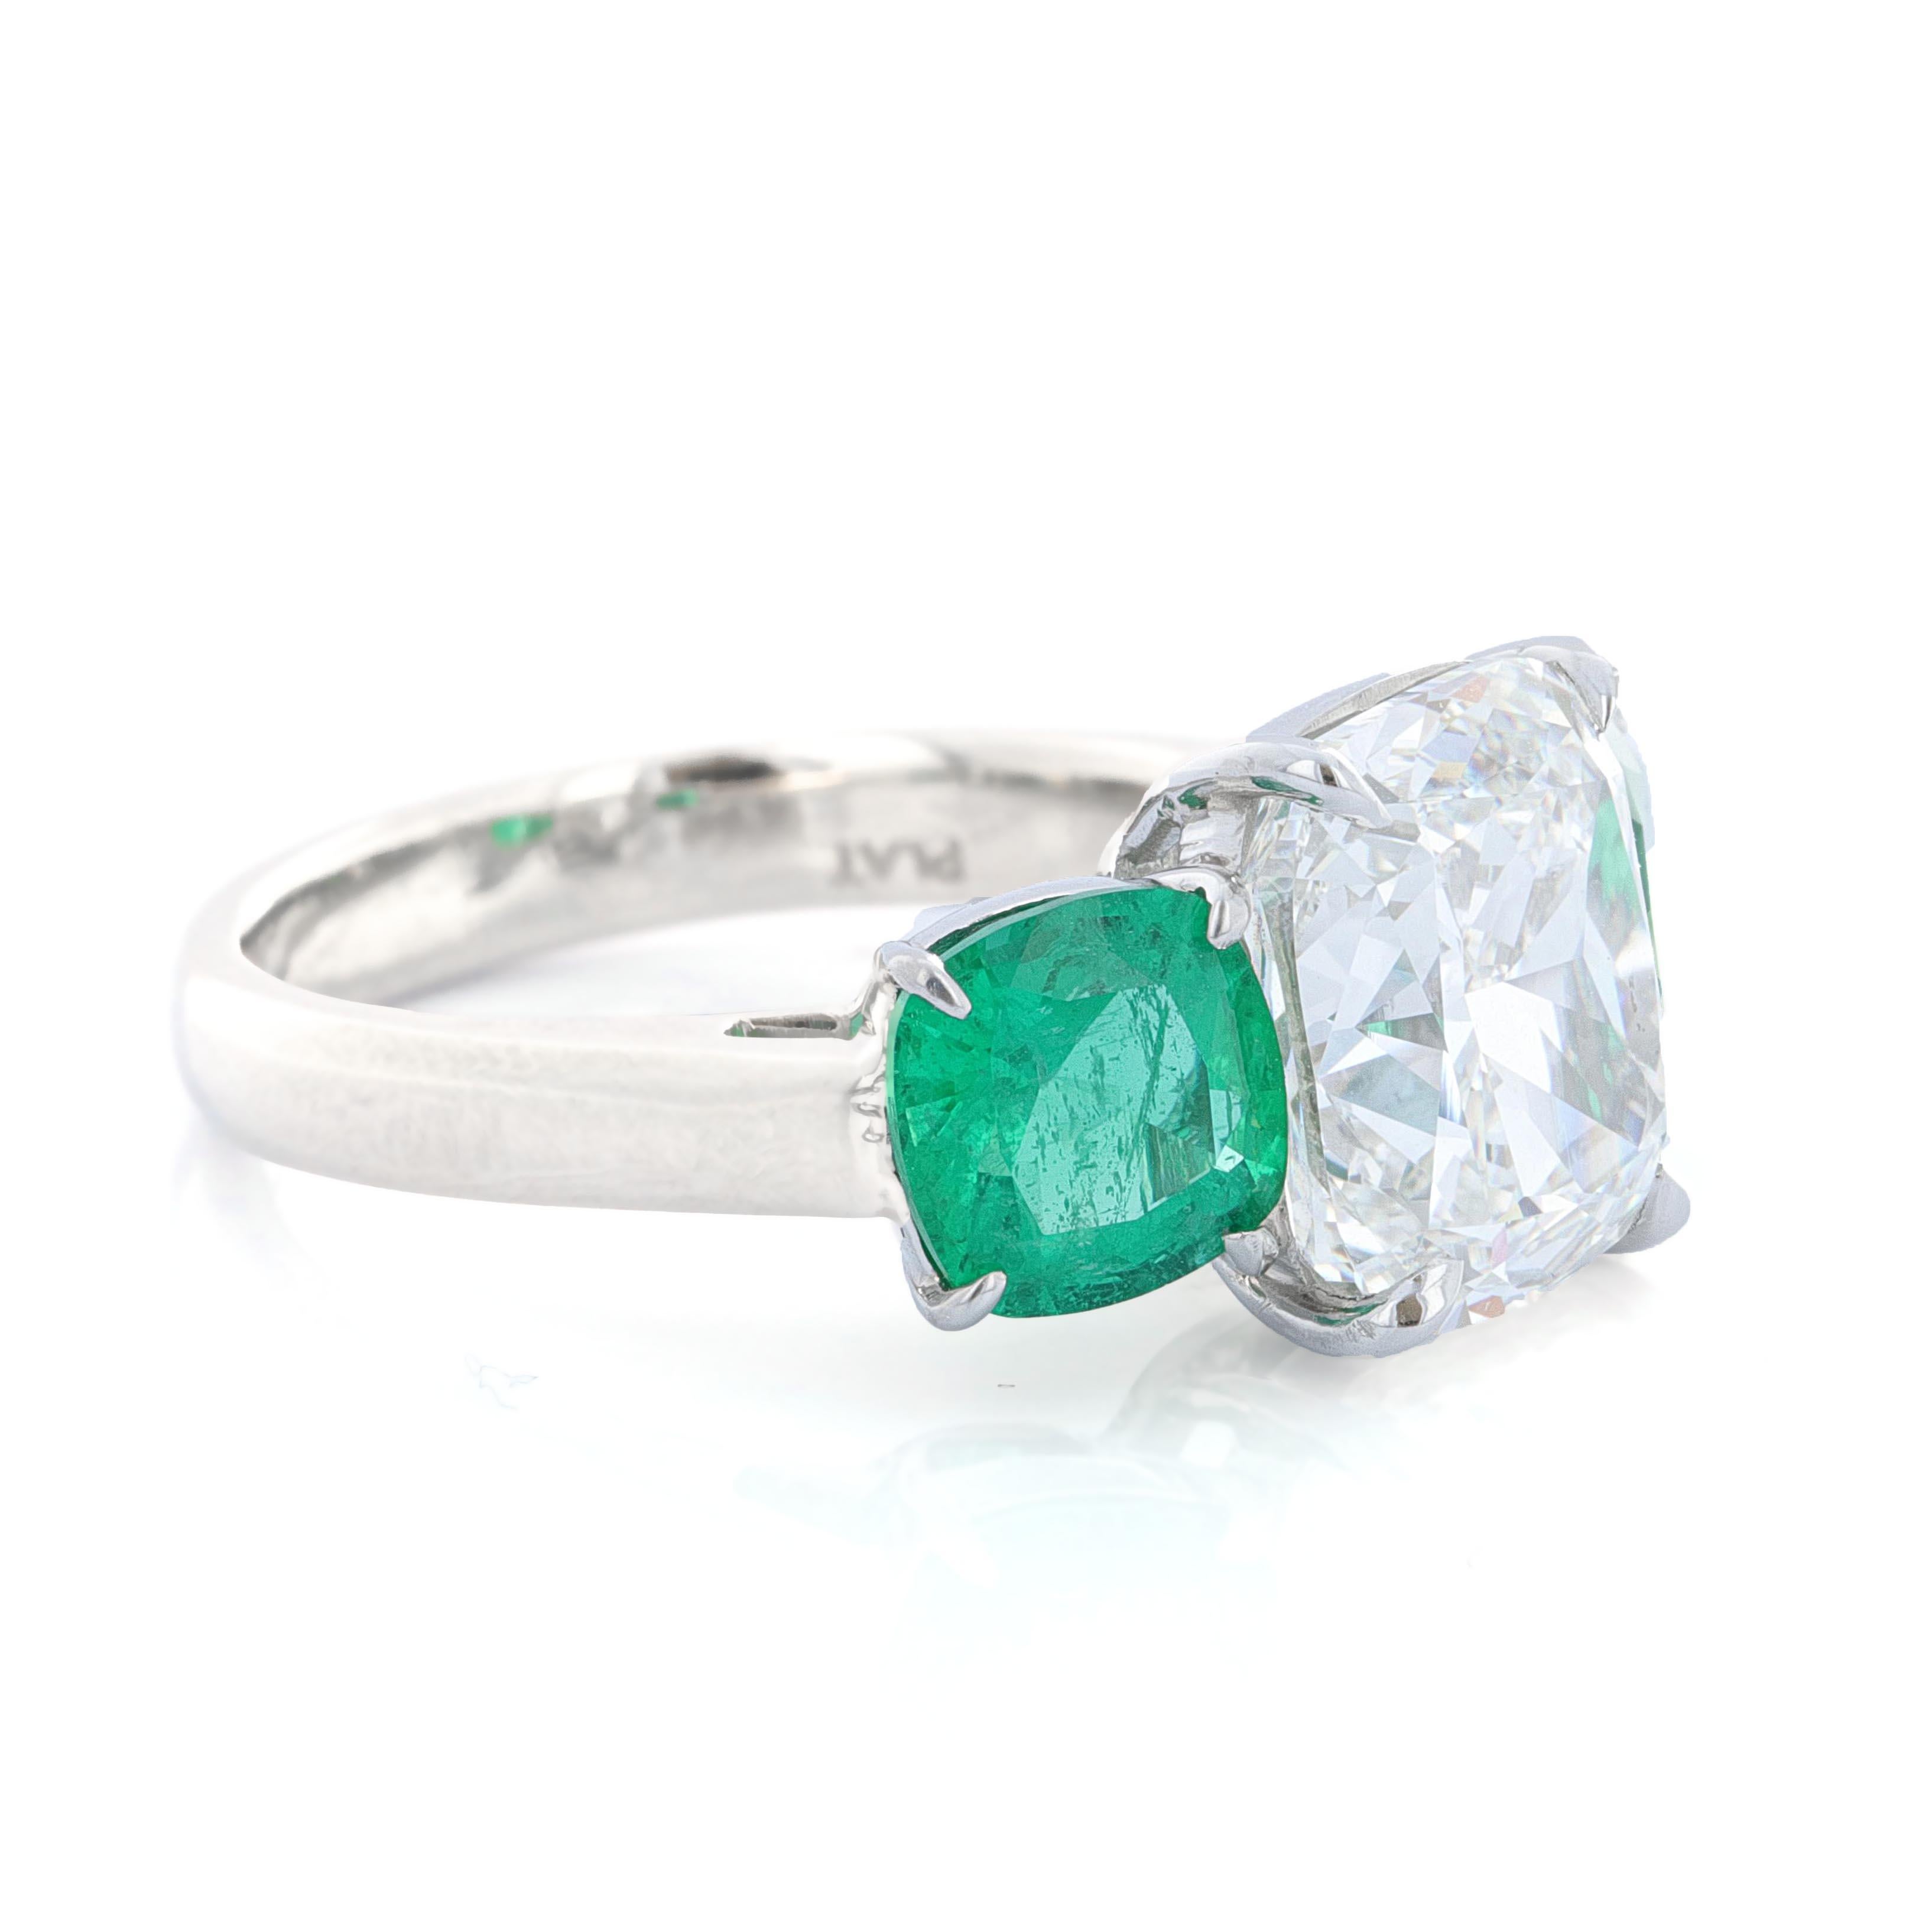 Platinum three stone diamond ring with cushion cut center and emerald side stone. The centerstone is GIA certified. It is a cushion cut modified brilliant weighing 4.73 carats. It is G color and VS1 clarity. The diamond measures 10.00 x 8.91 x